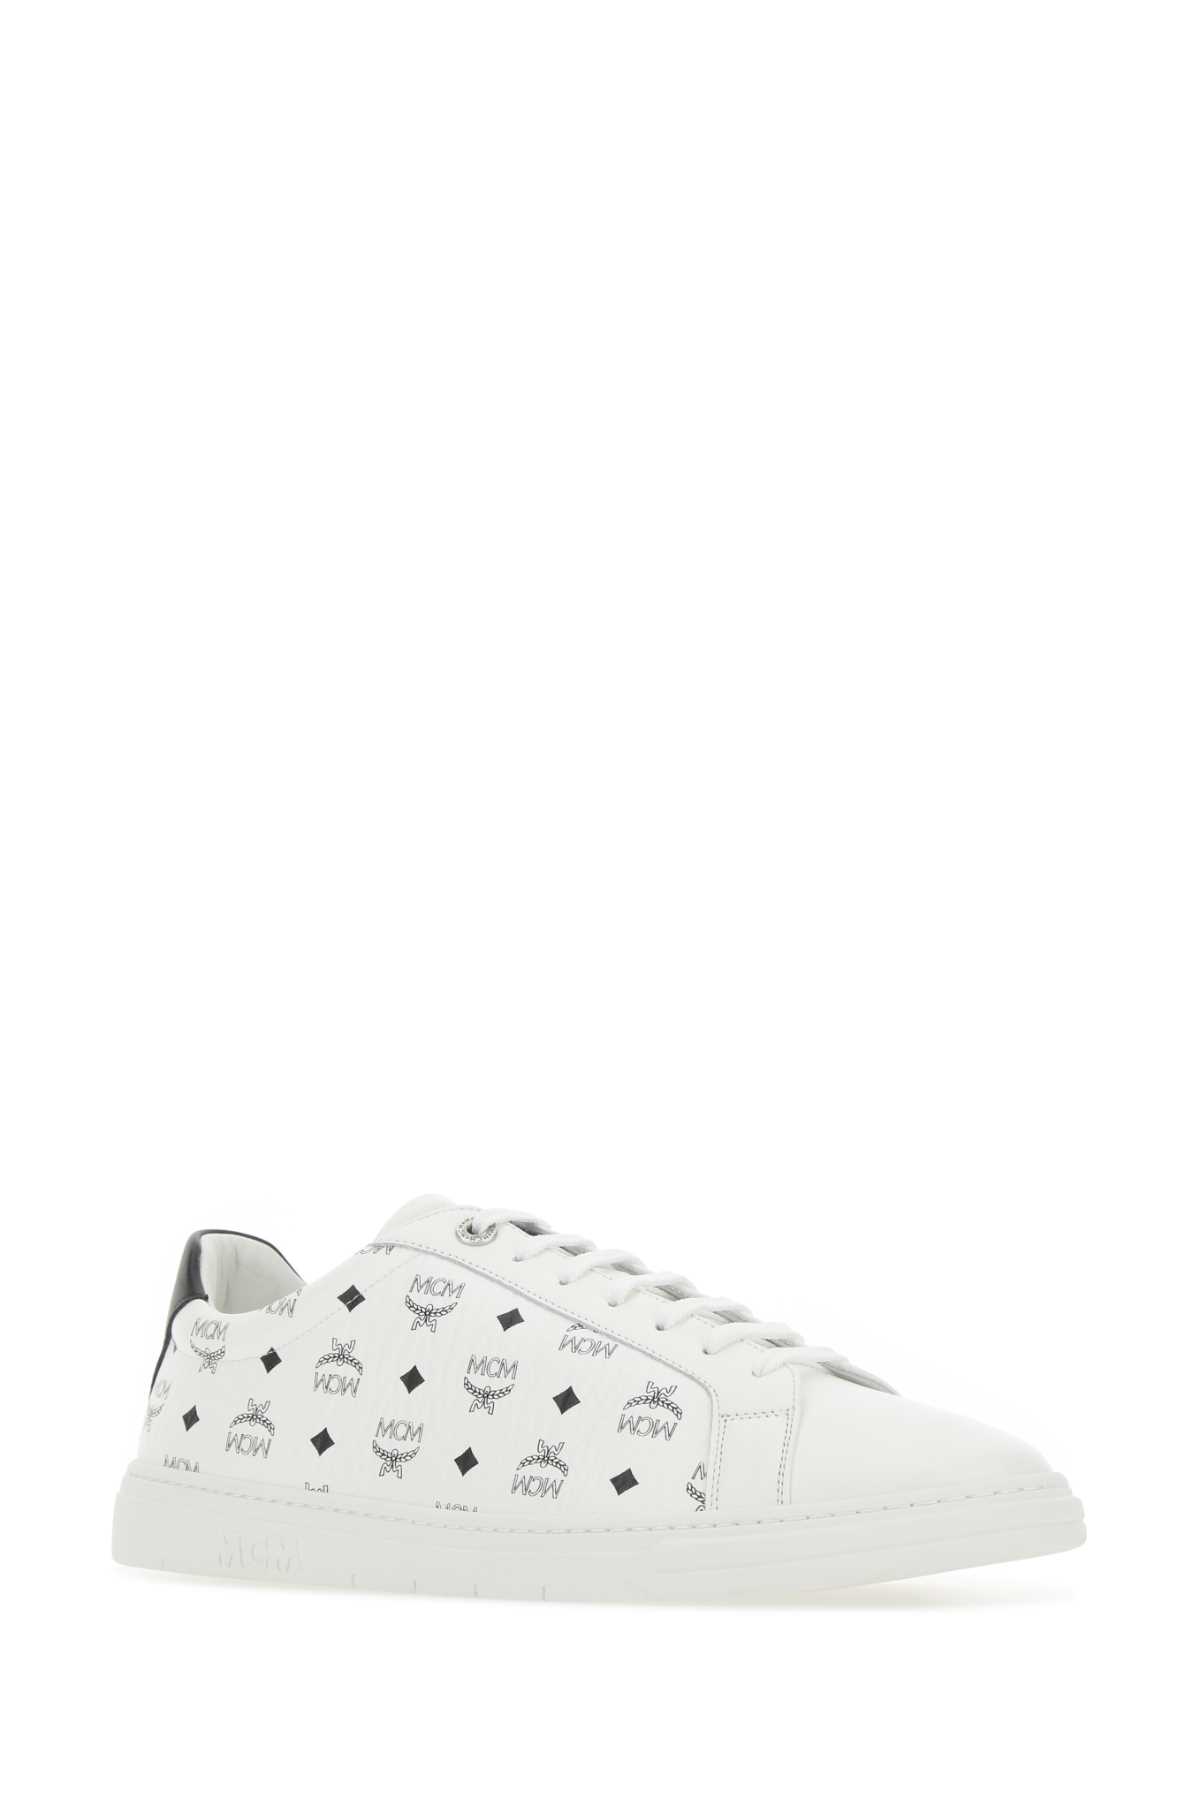 Mcm White Canvas And Leather Terrain Sneakers